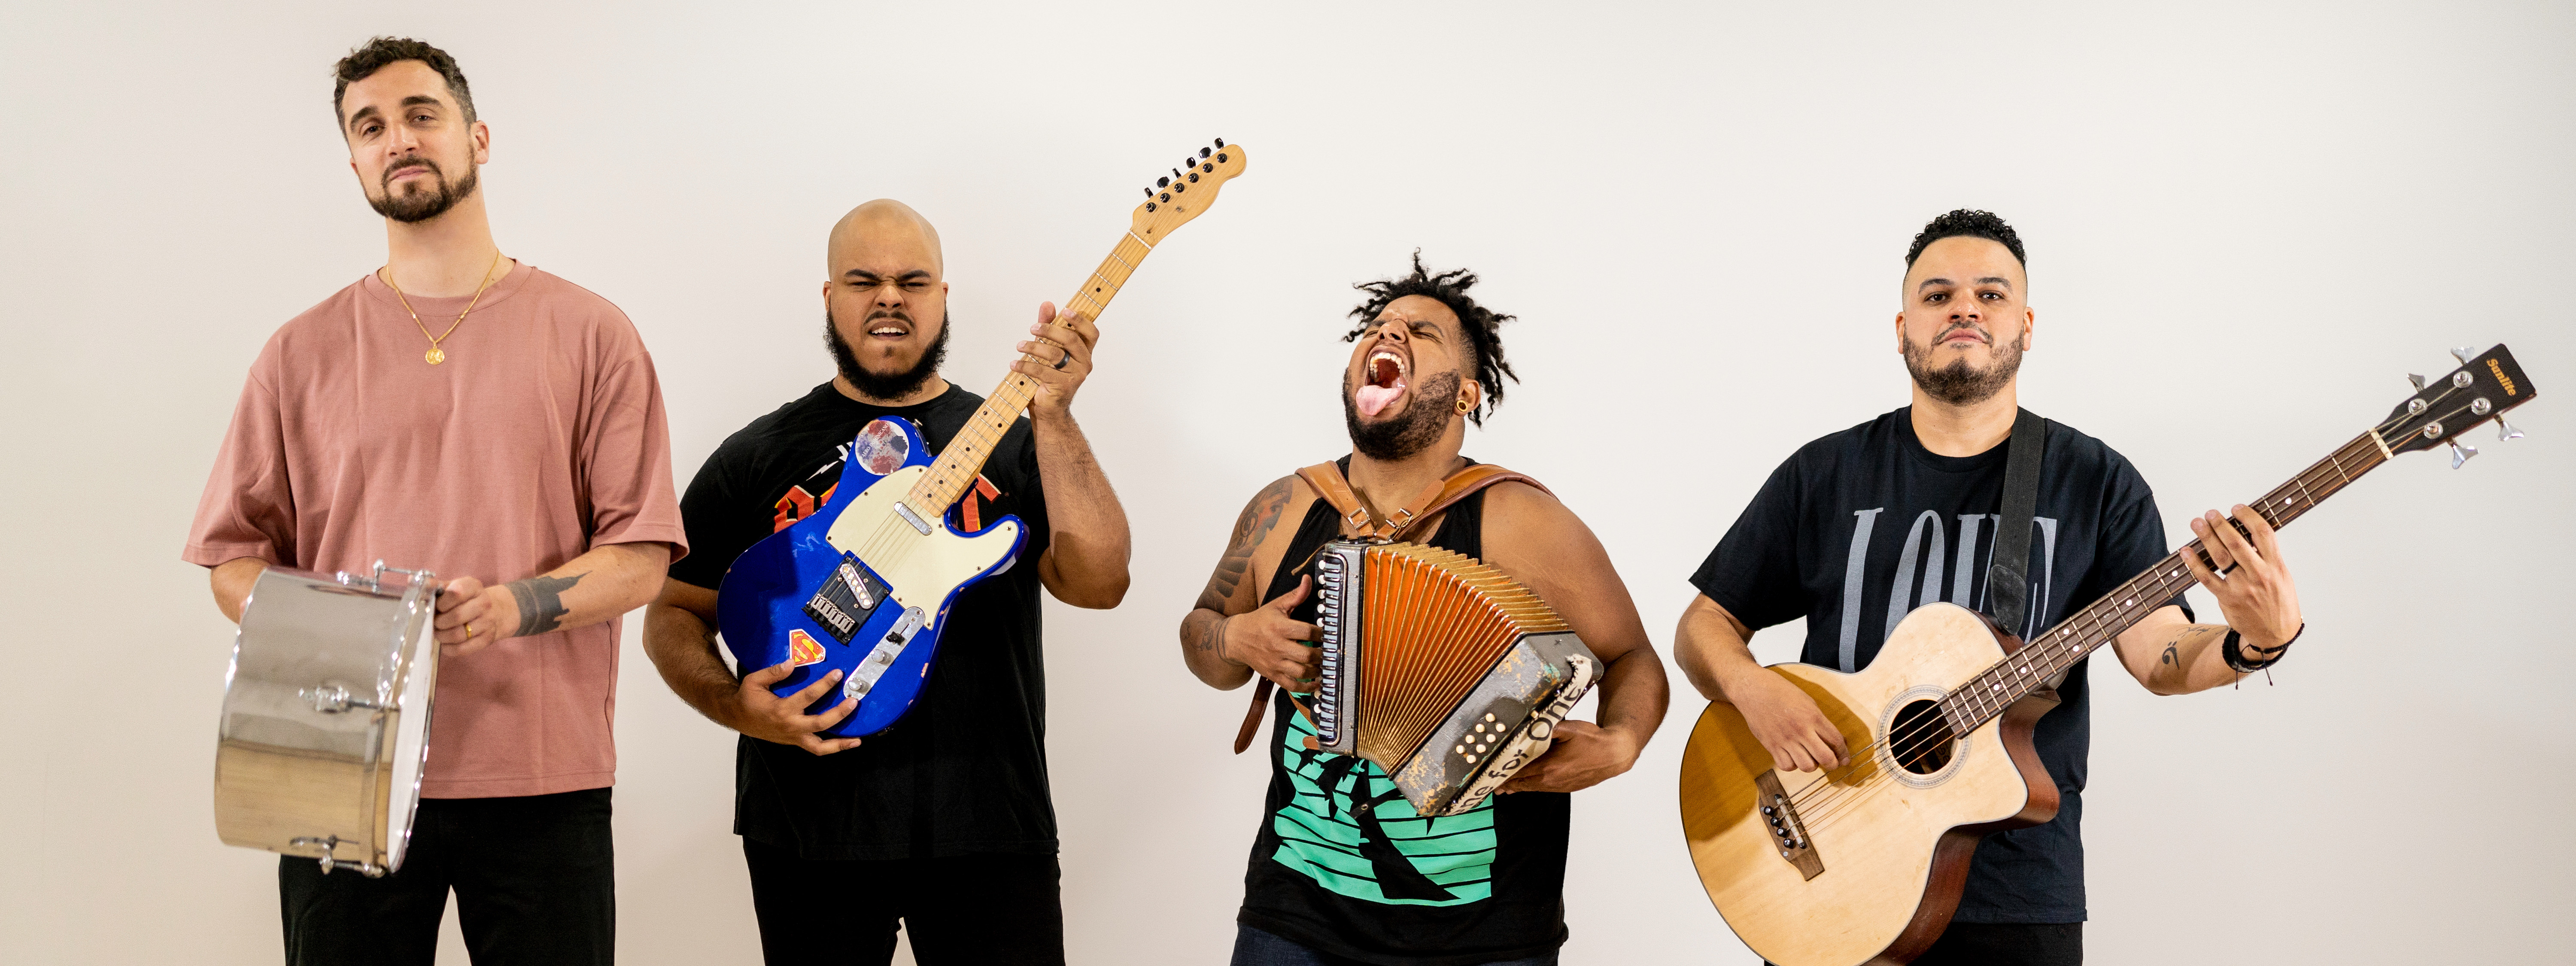 Afro Dominicano presented in partnership with the Brooklyn Cumbia Festival